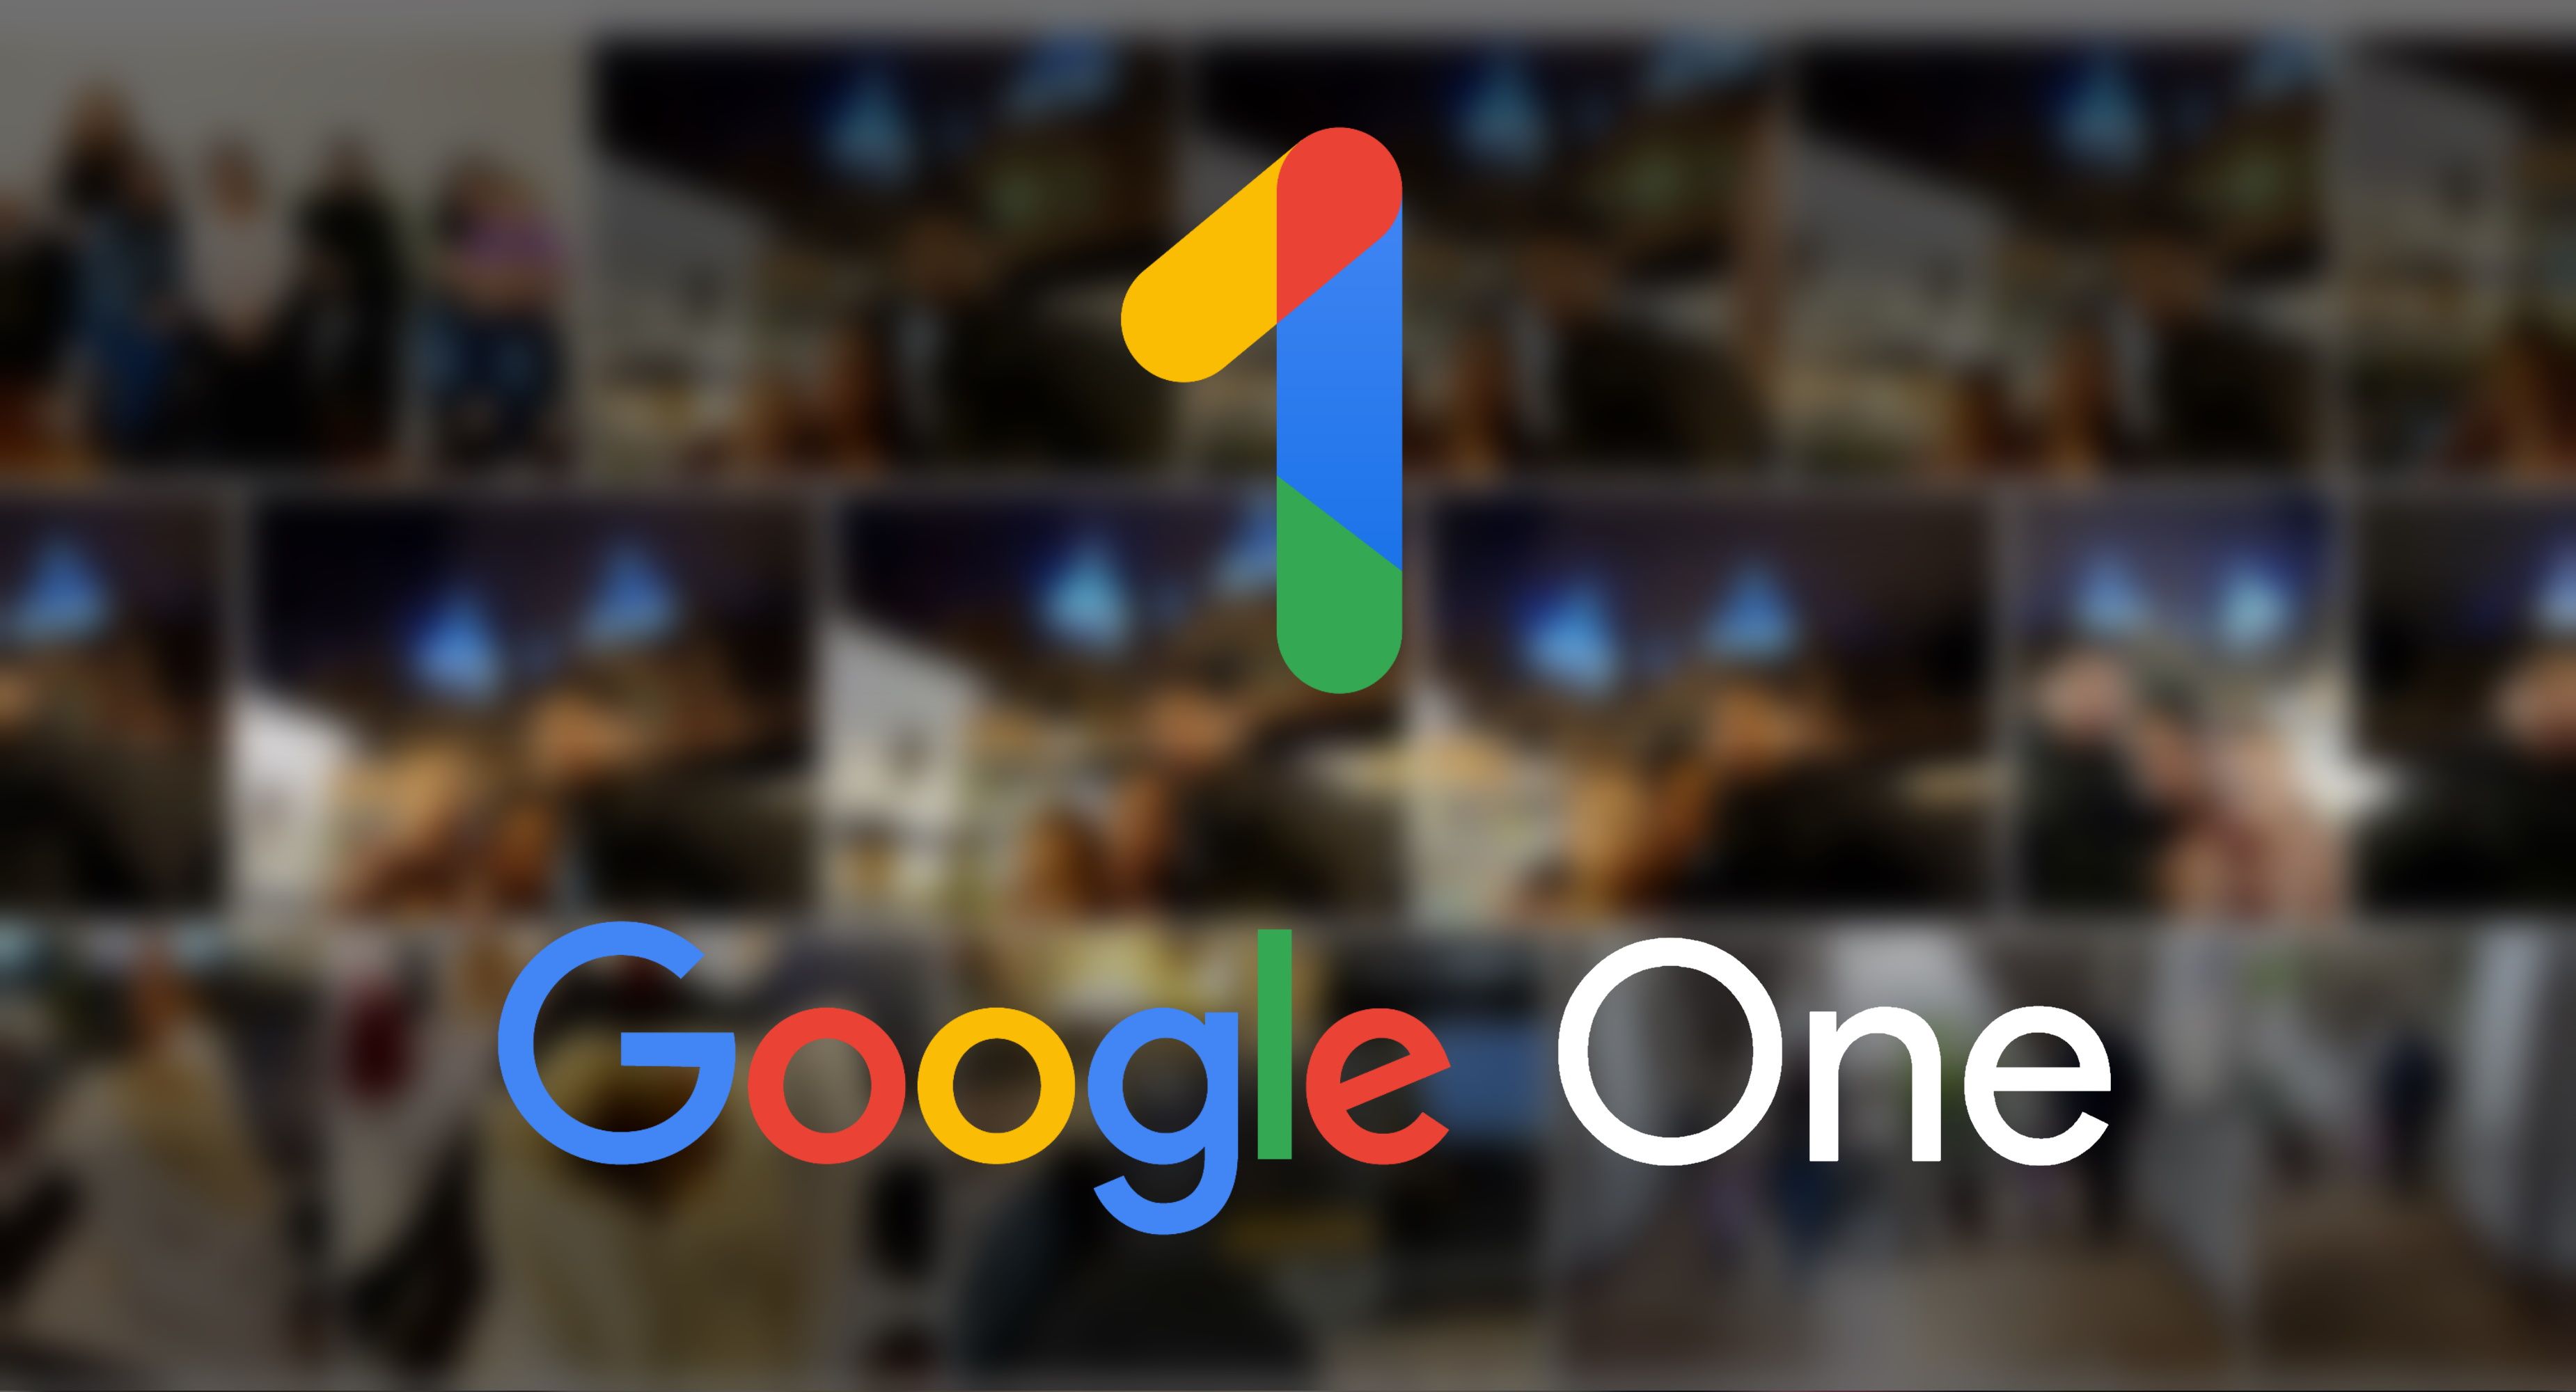 What is Google One?